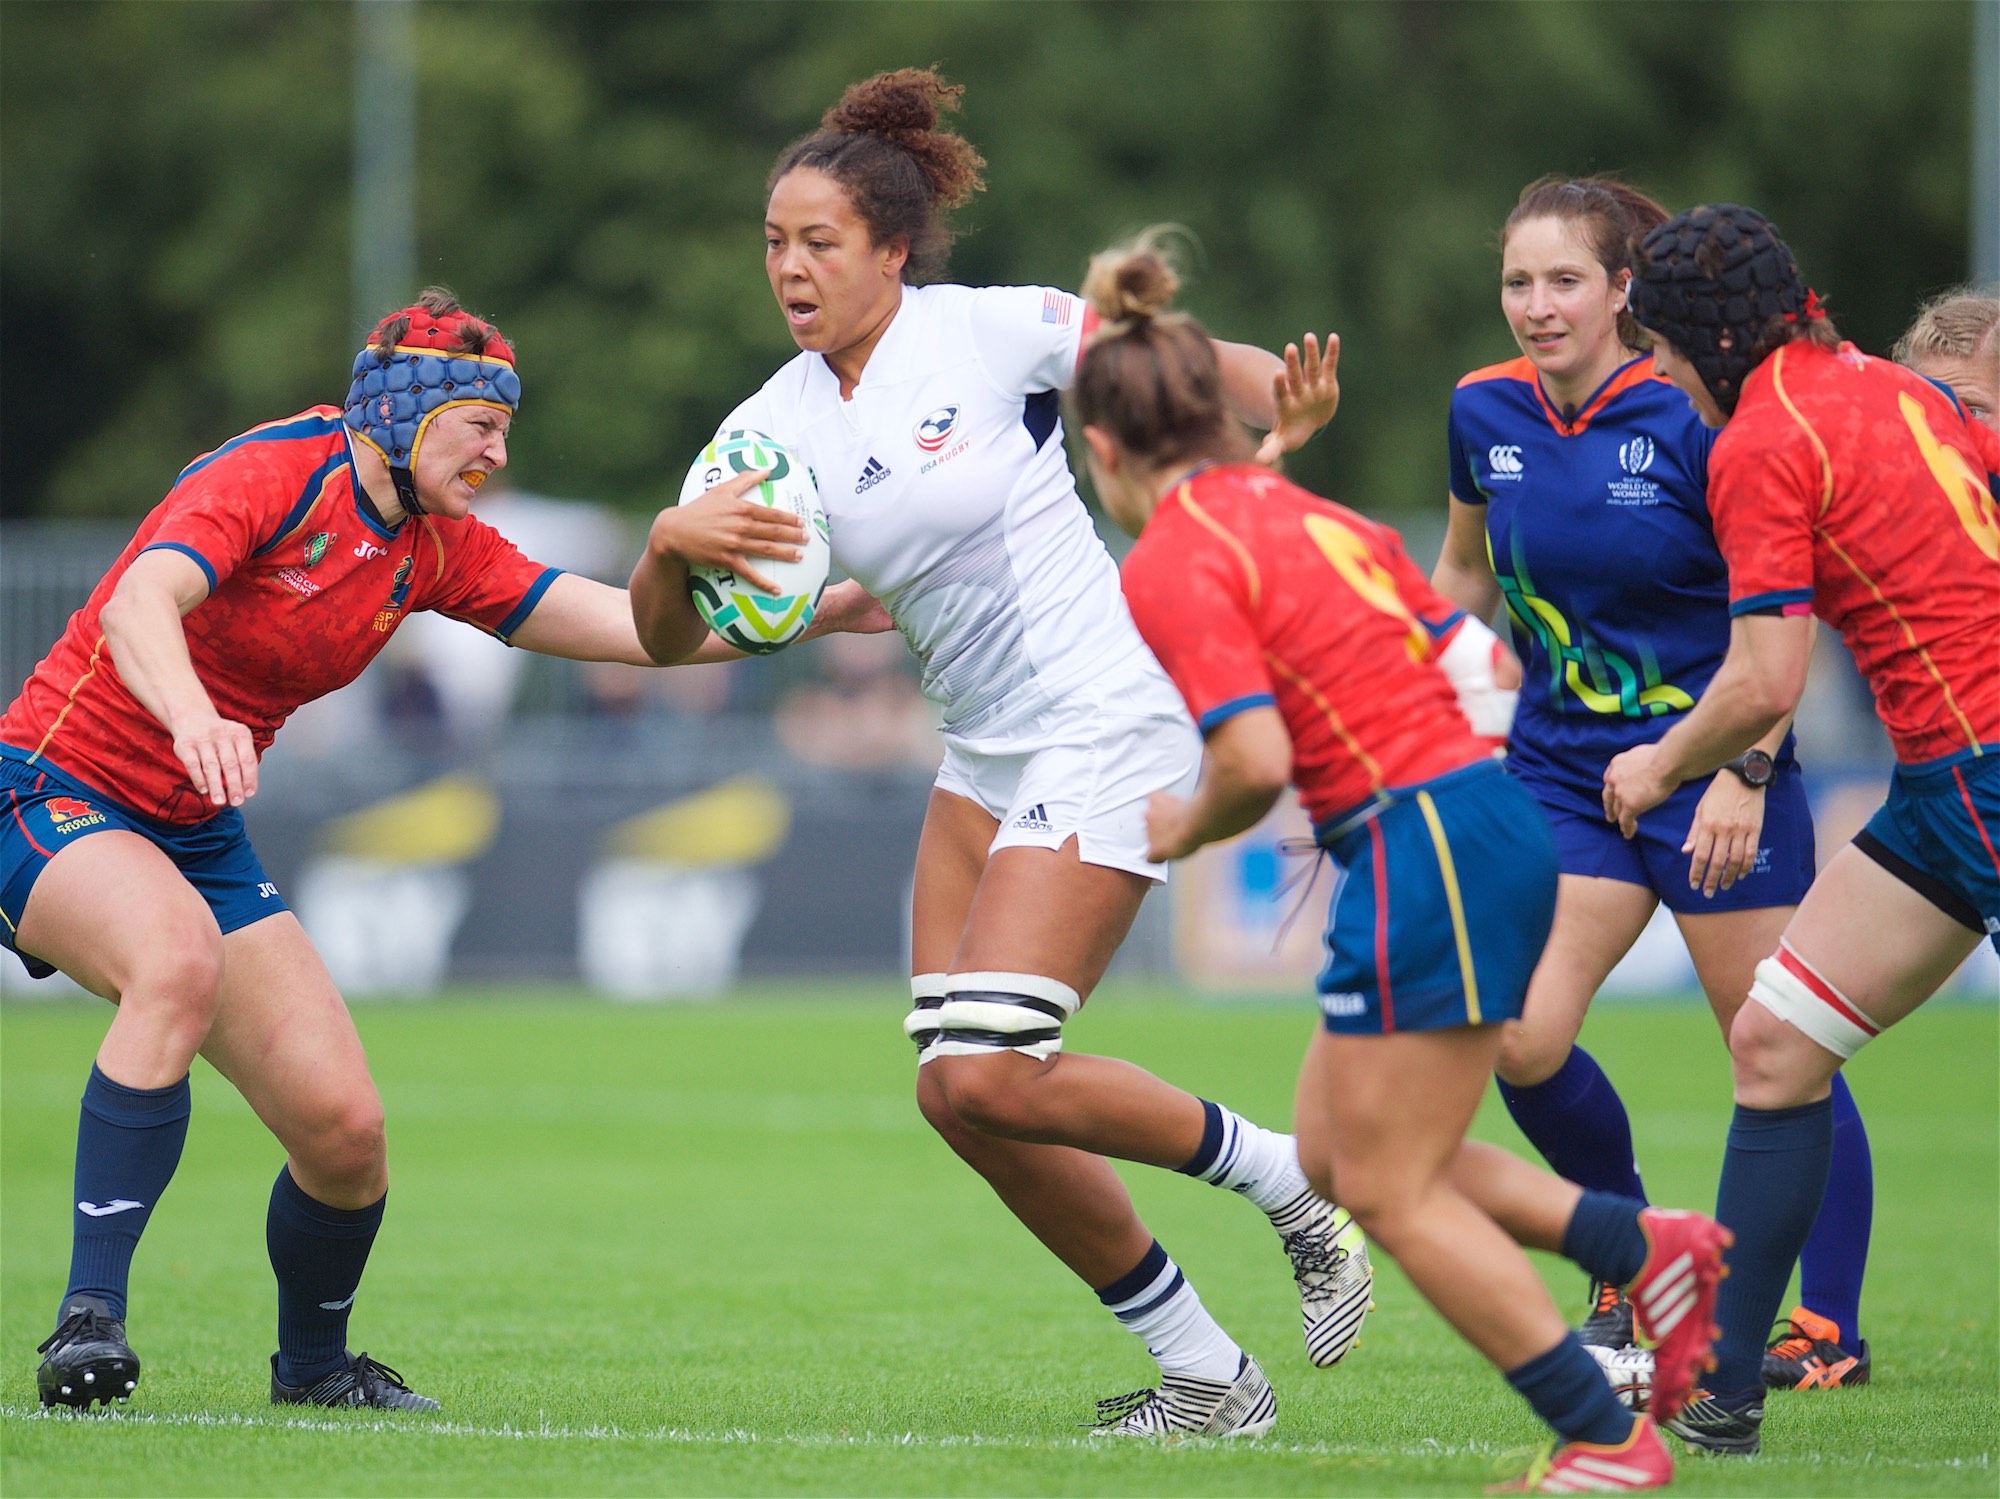 Jordan Gray was player of the game for the USA against Spain in the 2017 Women's Rugby World Cup. Ian Muir photo for FloRugby.